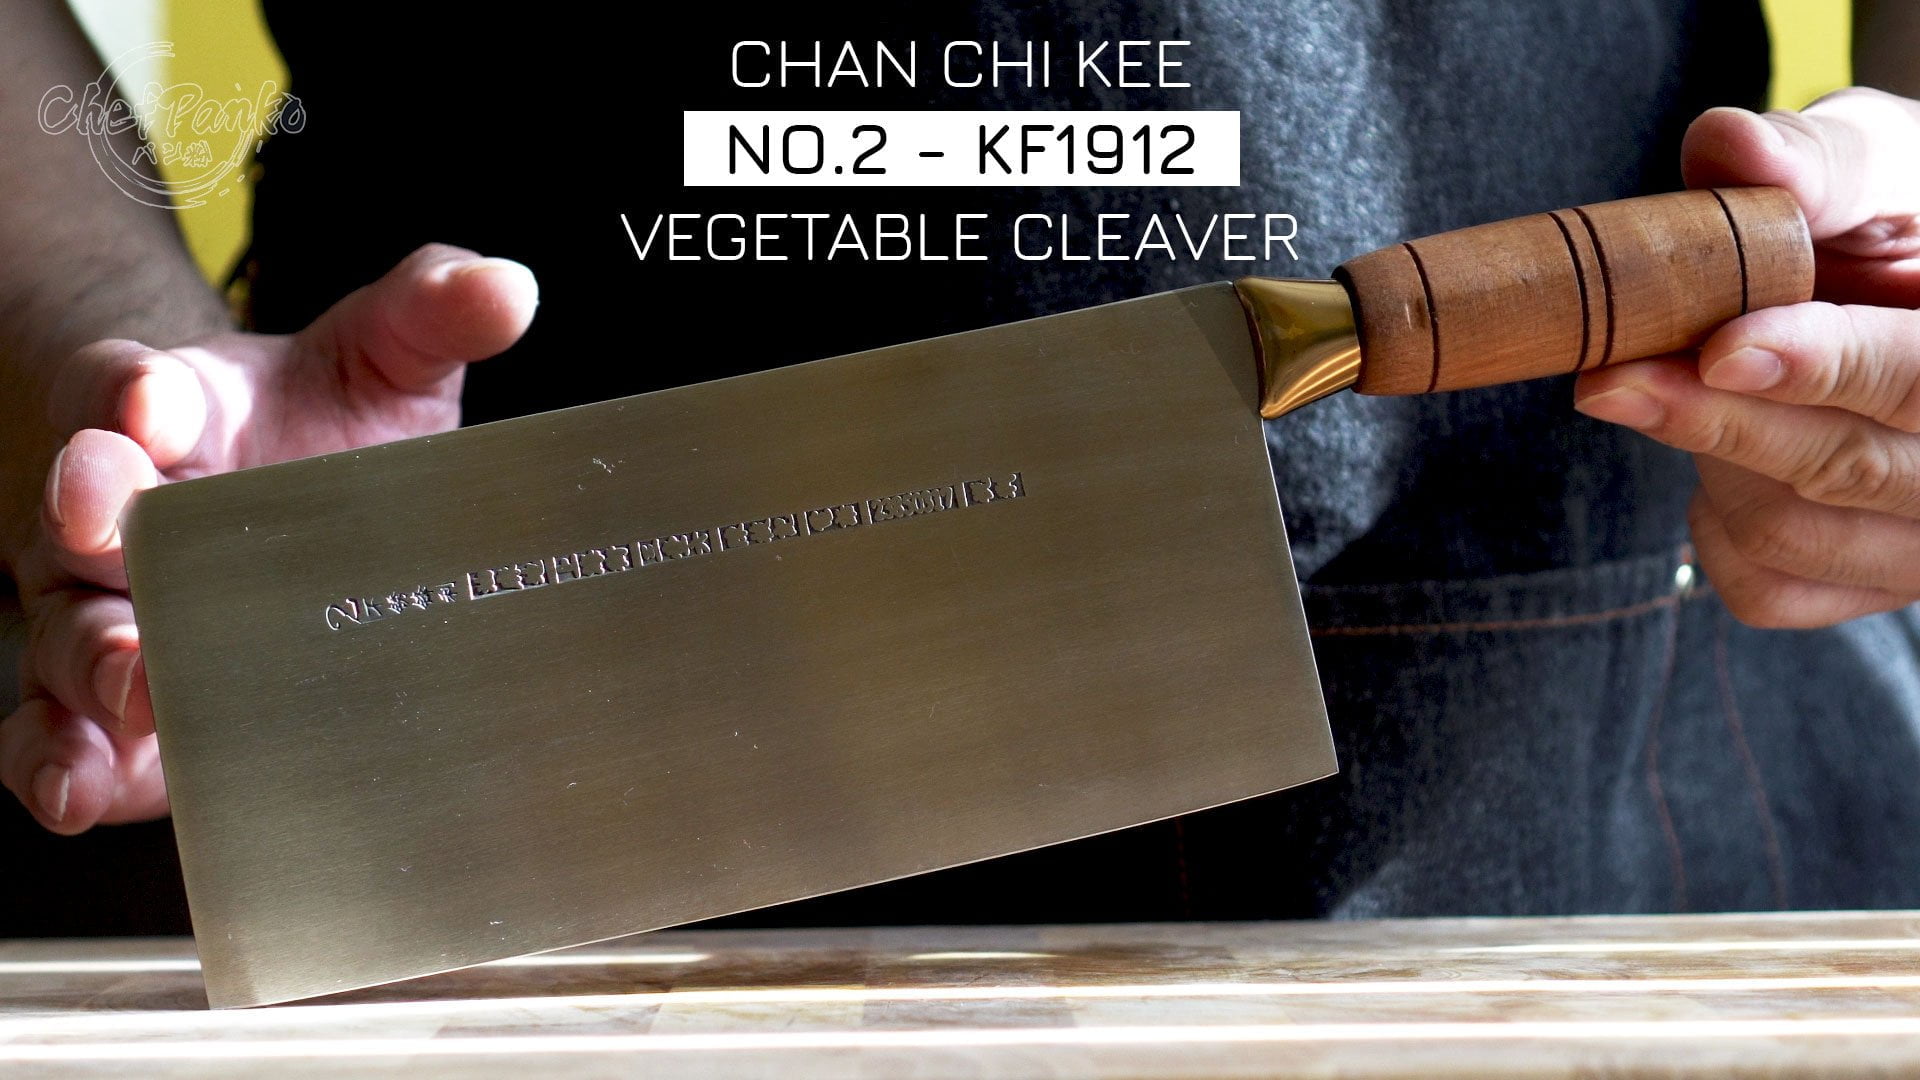 CCK Vegetable Cleaver (Slicer) KF1912 - Chan Chi Kee Cai Dao